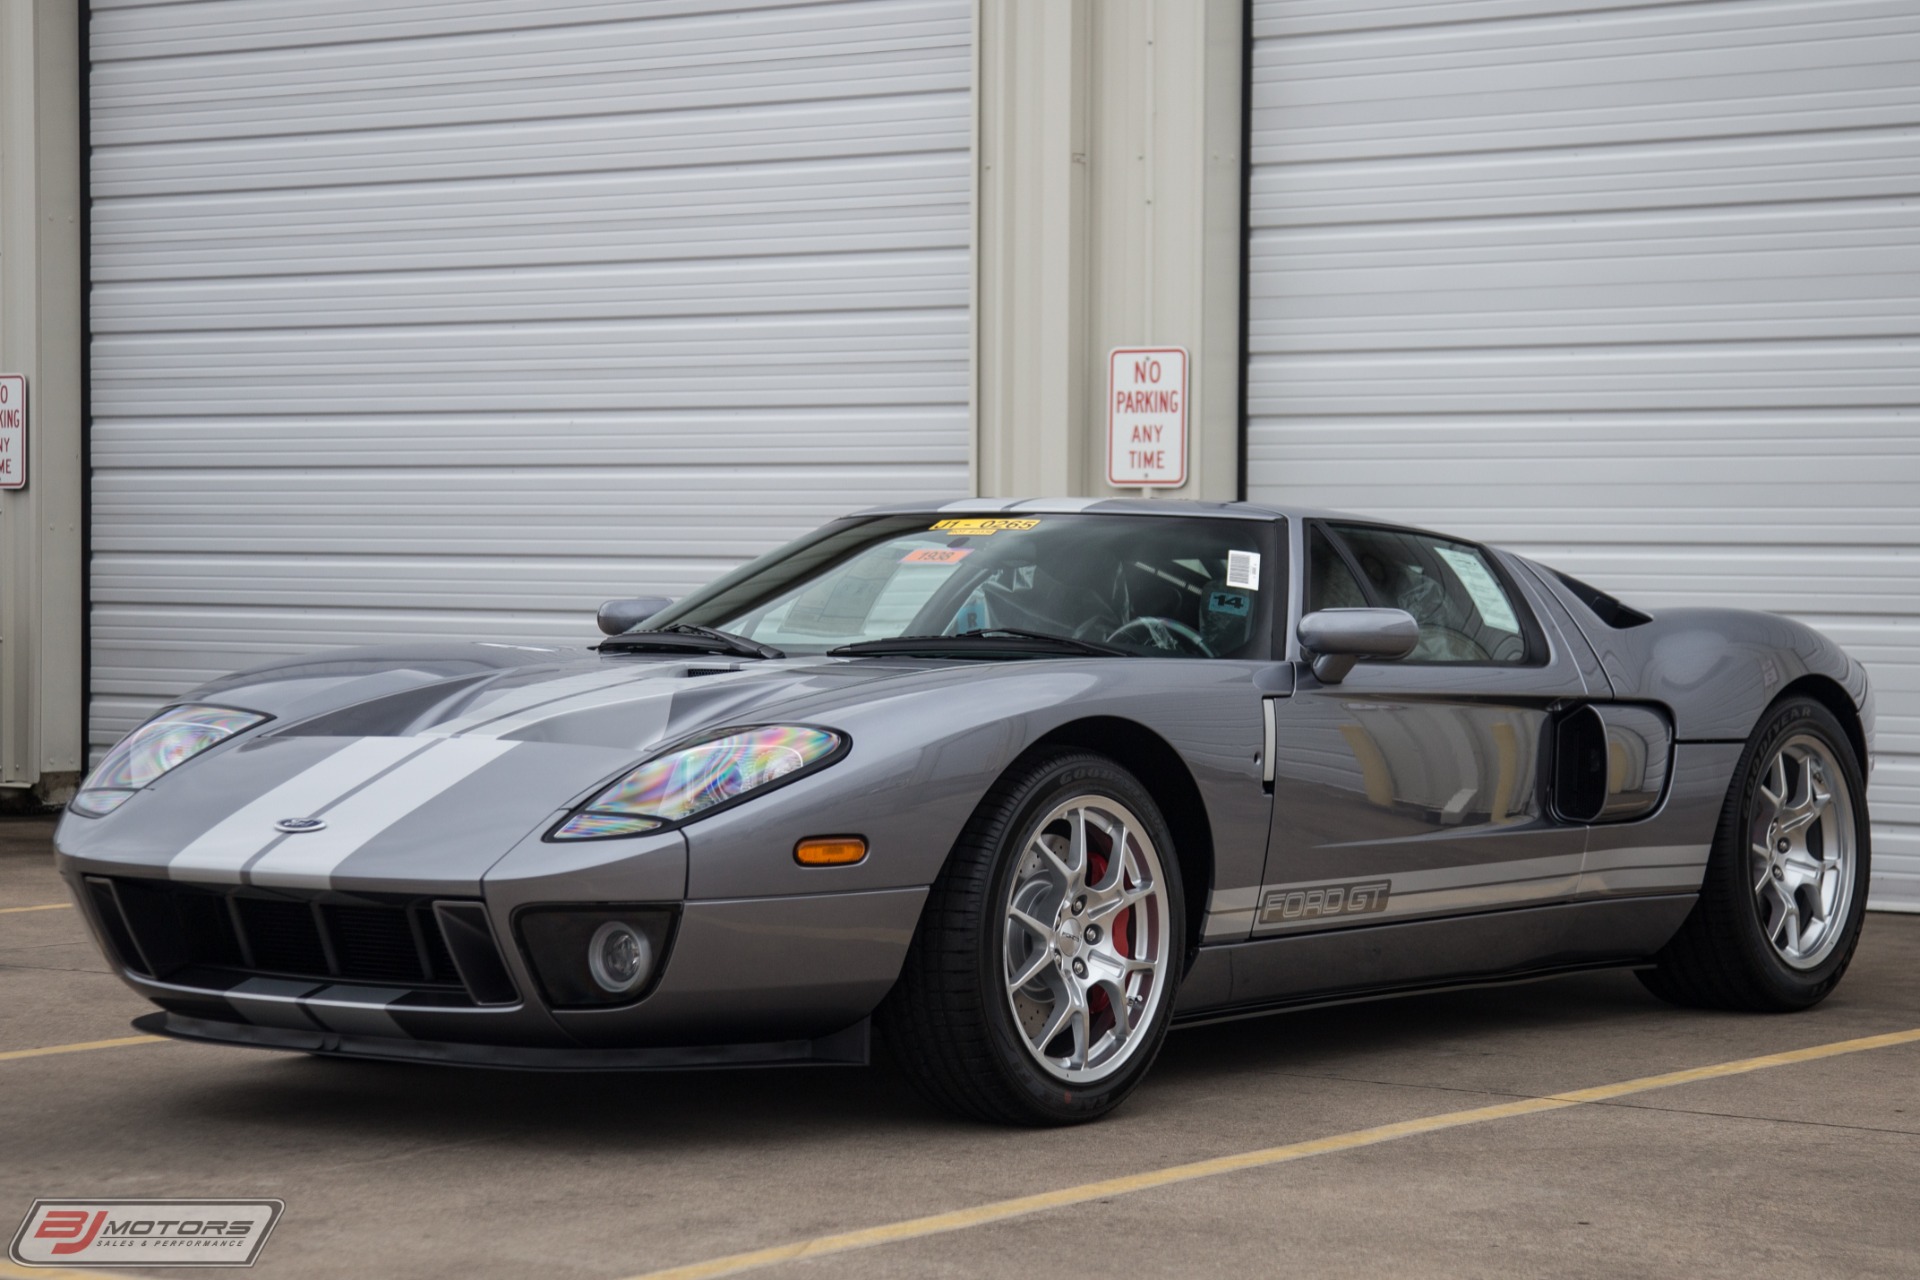 Used-2006-Ford-GT-Tungsten-with-Silver-Stripes